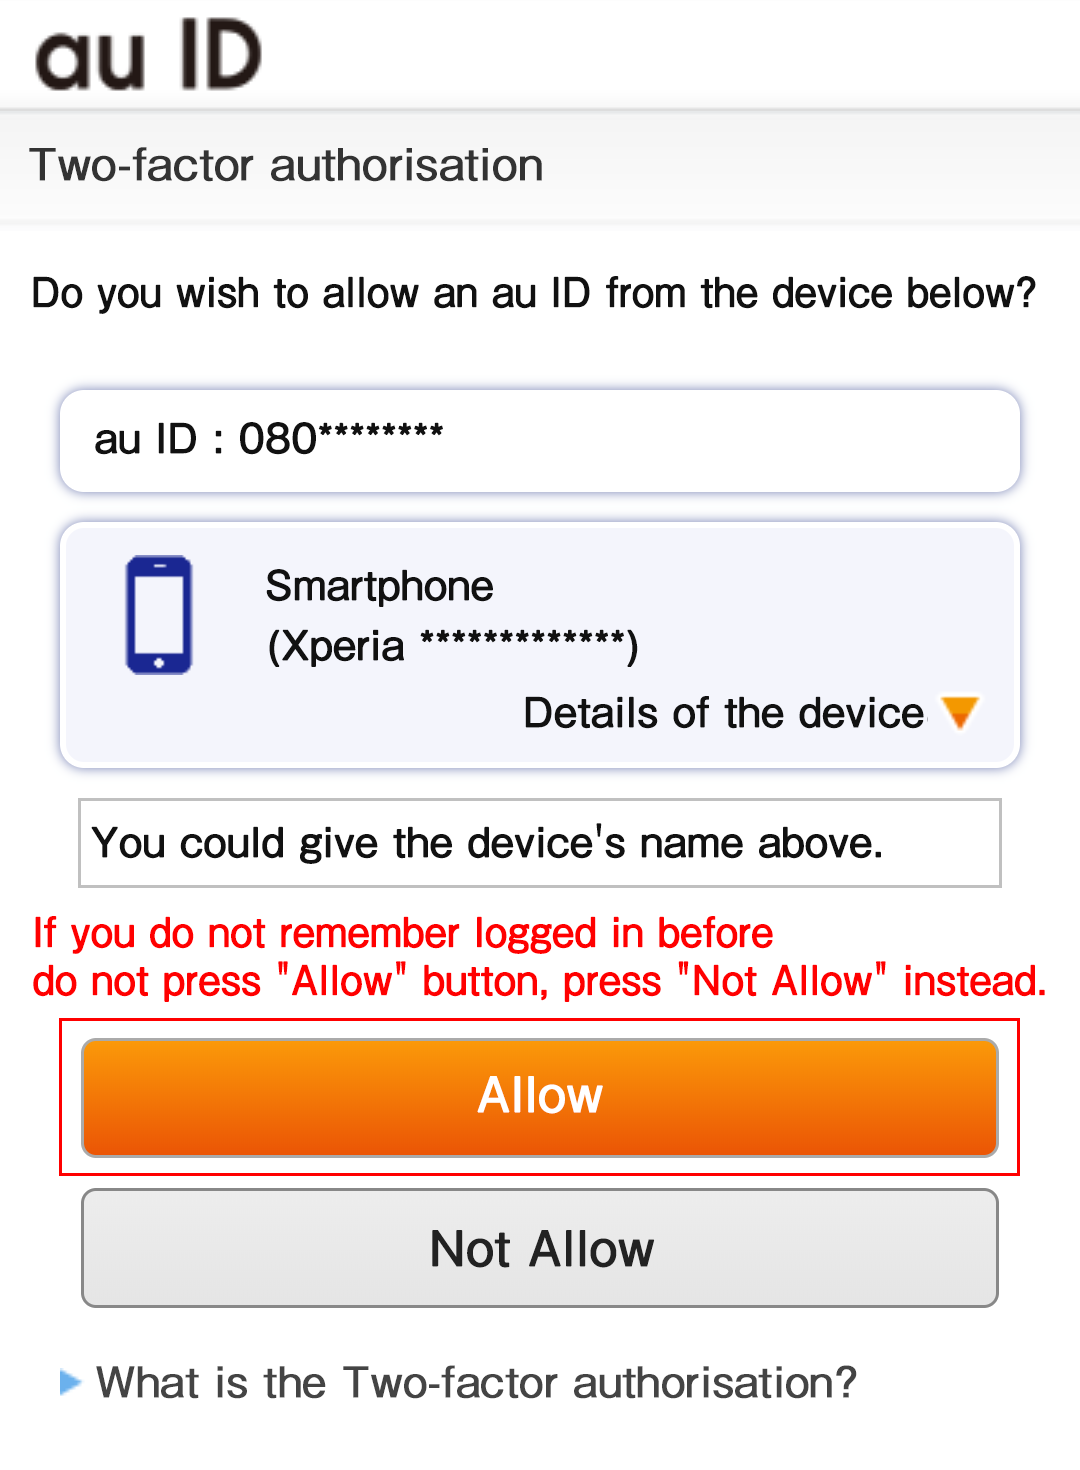 Verify the information of the device, authorize authentication to log in!